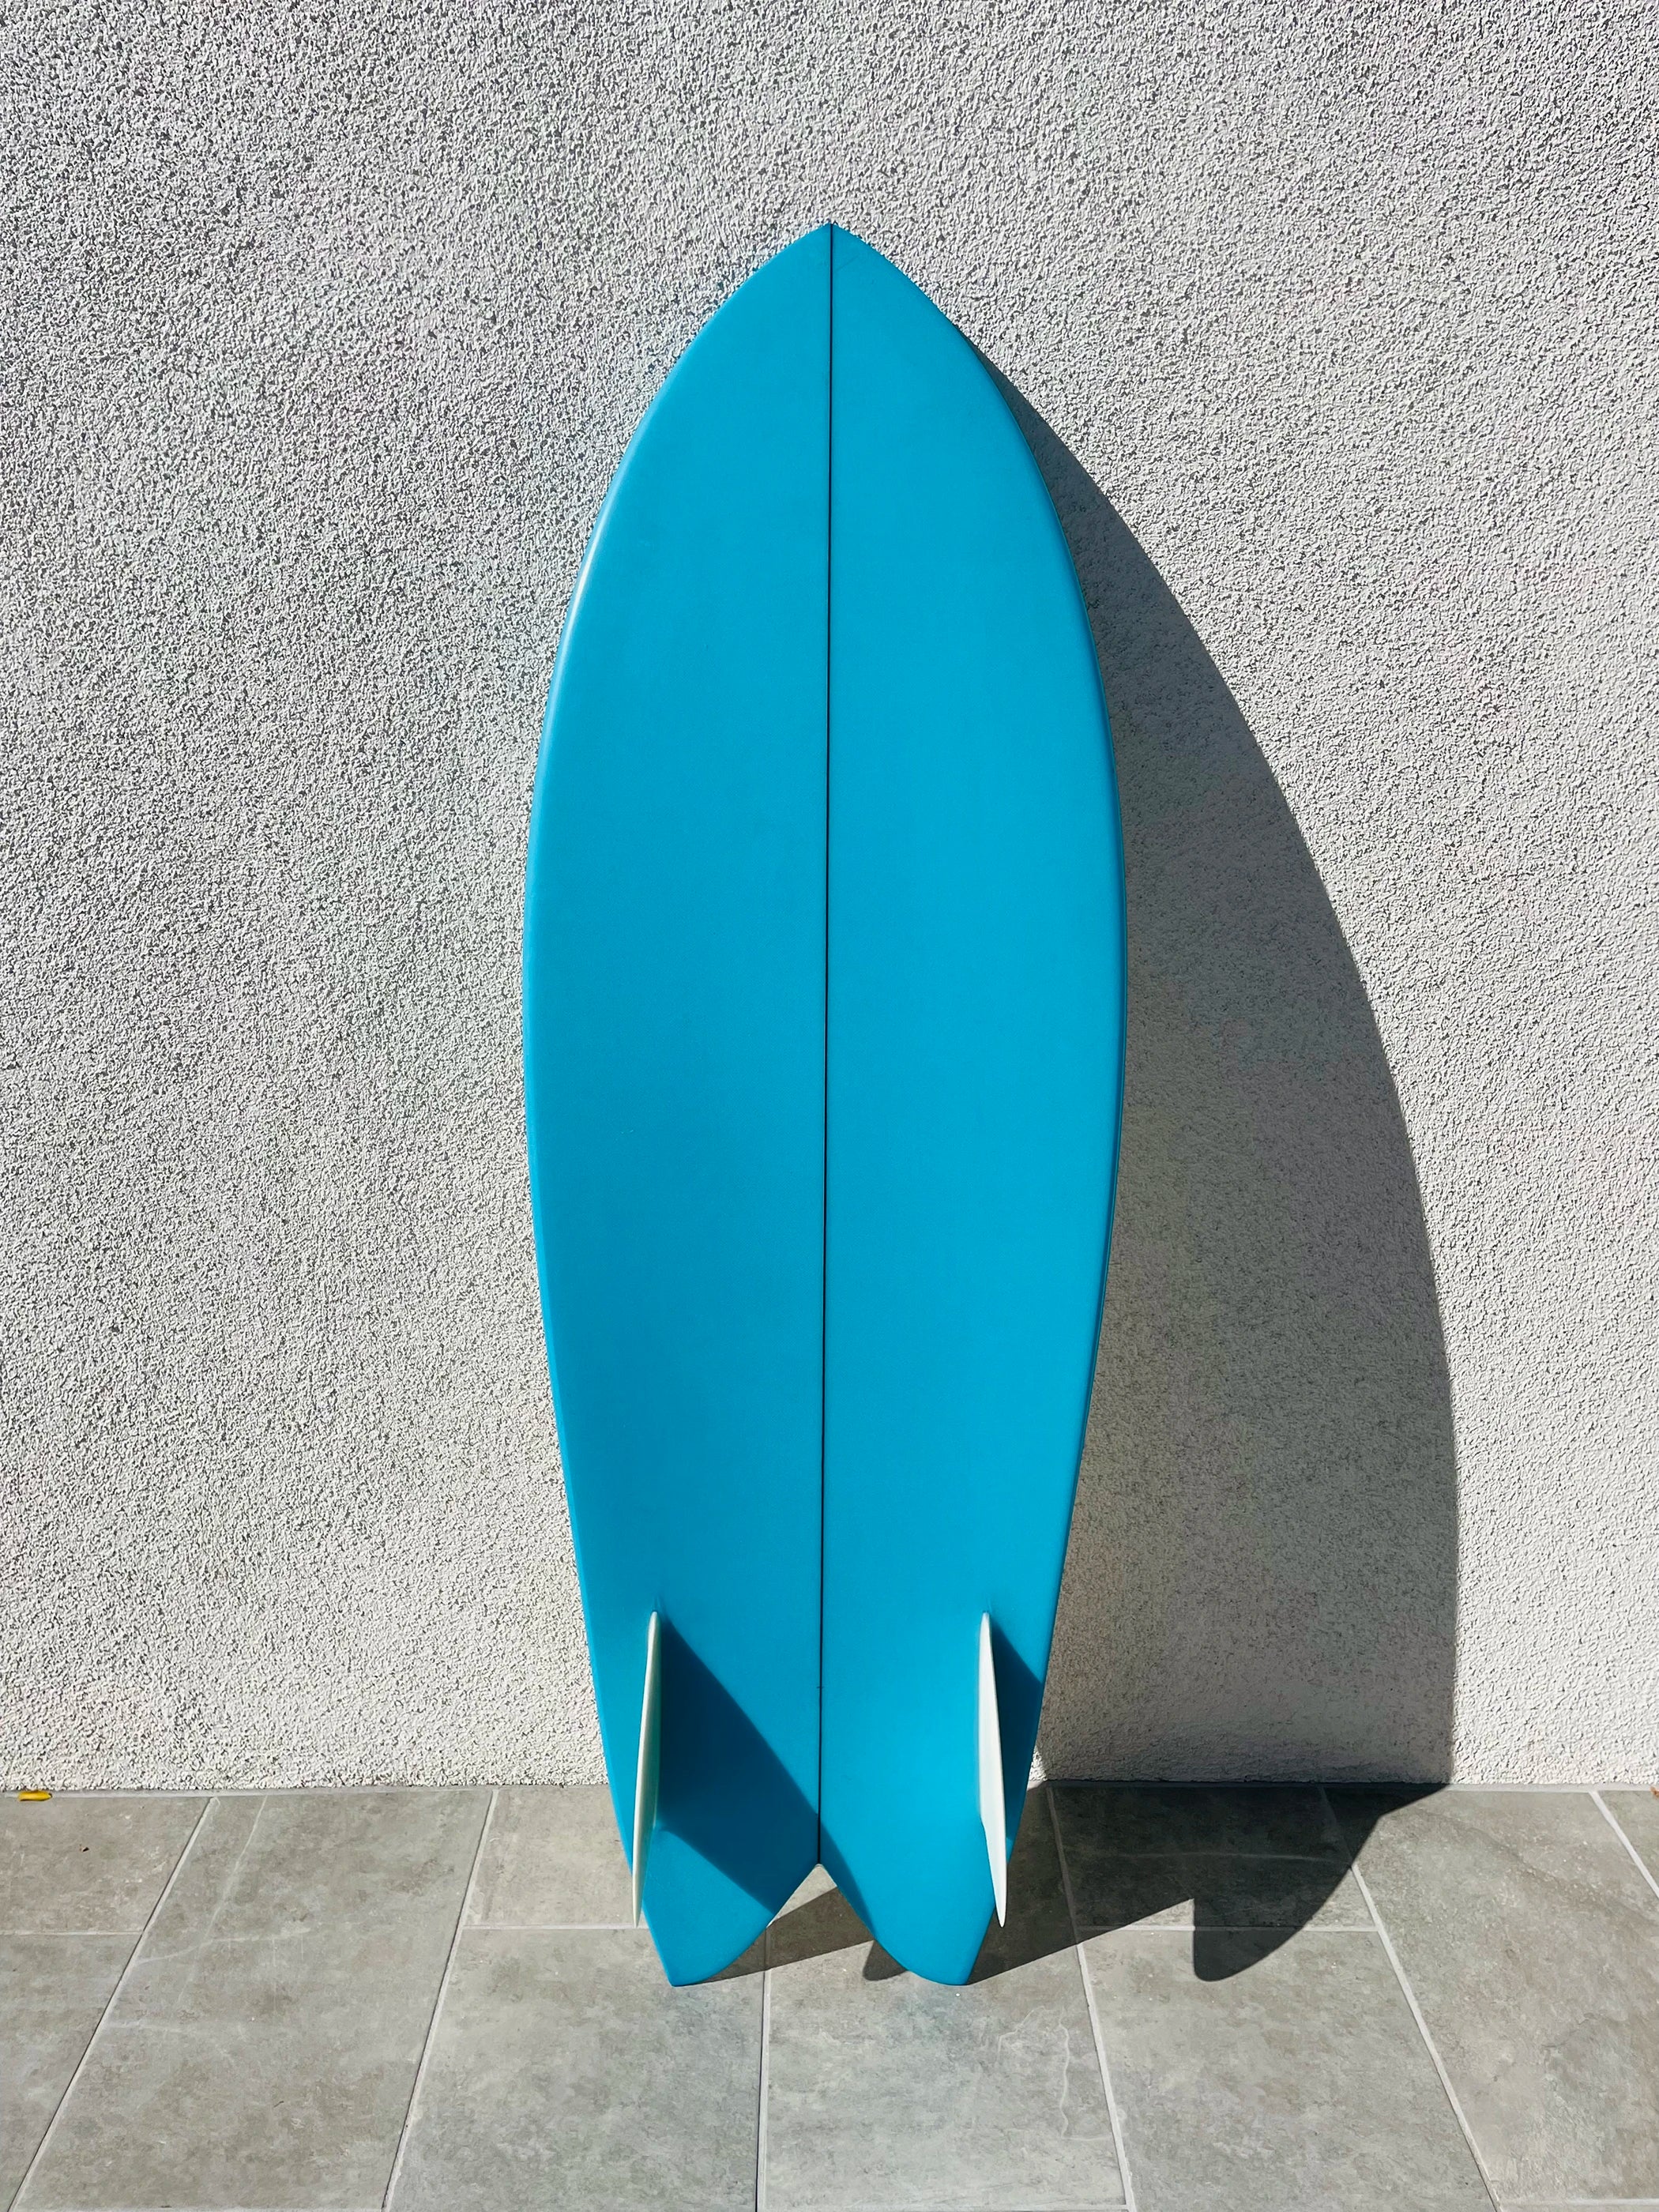 Ryan Burch | 5’3” Squit Blue Opaque Surfboard (USED)